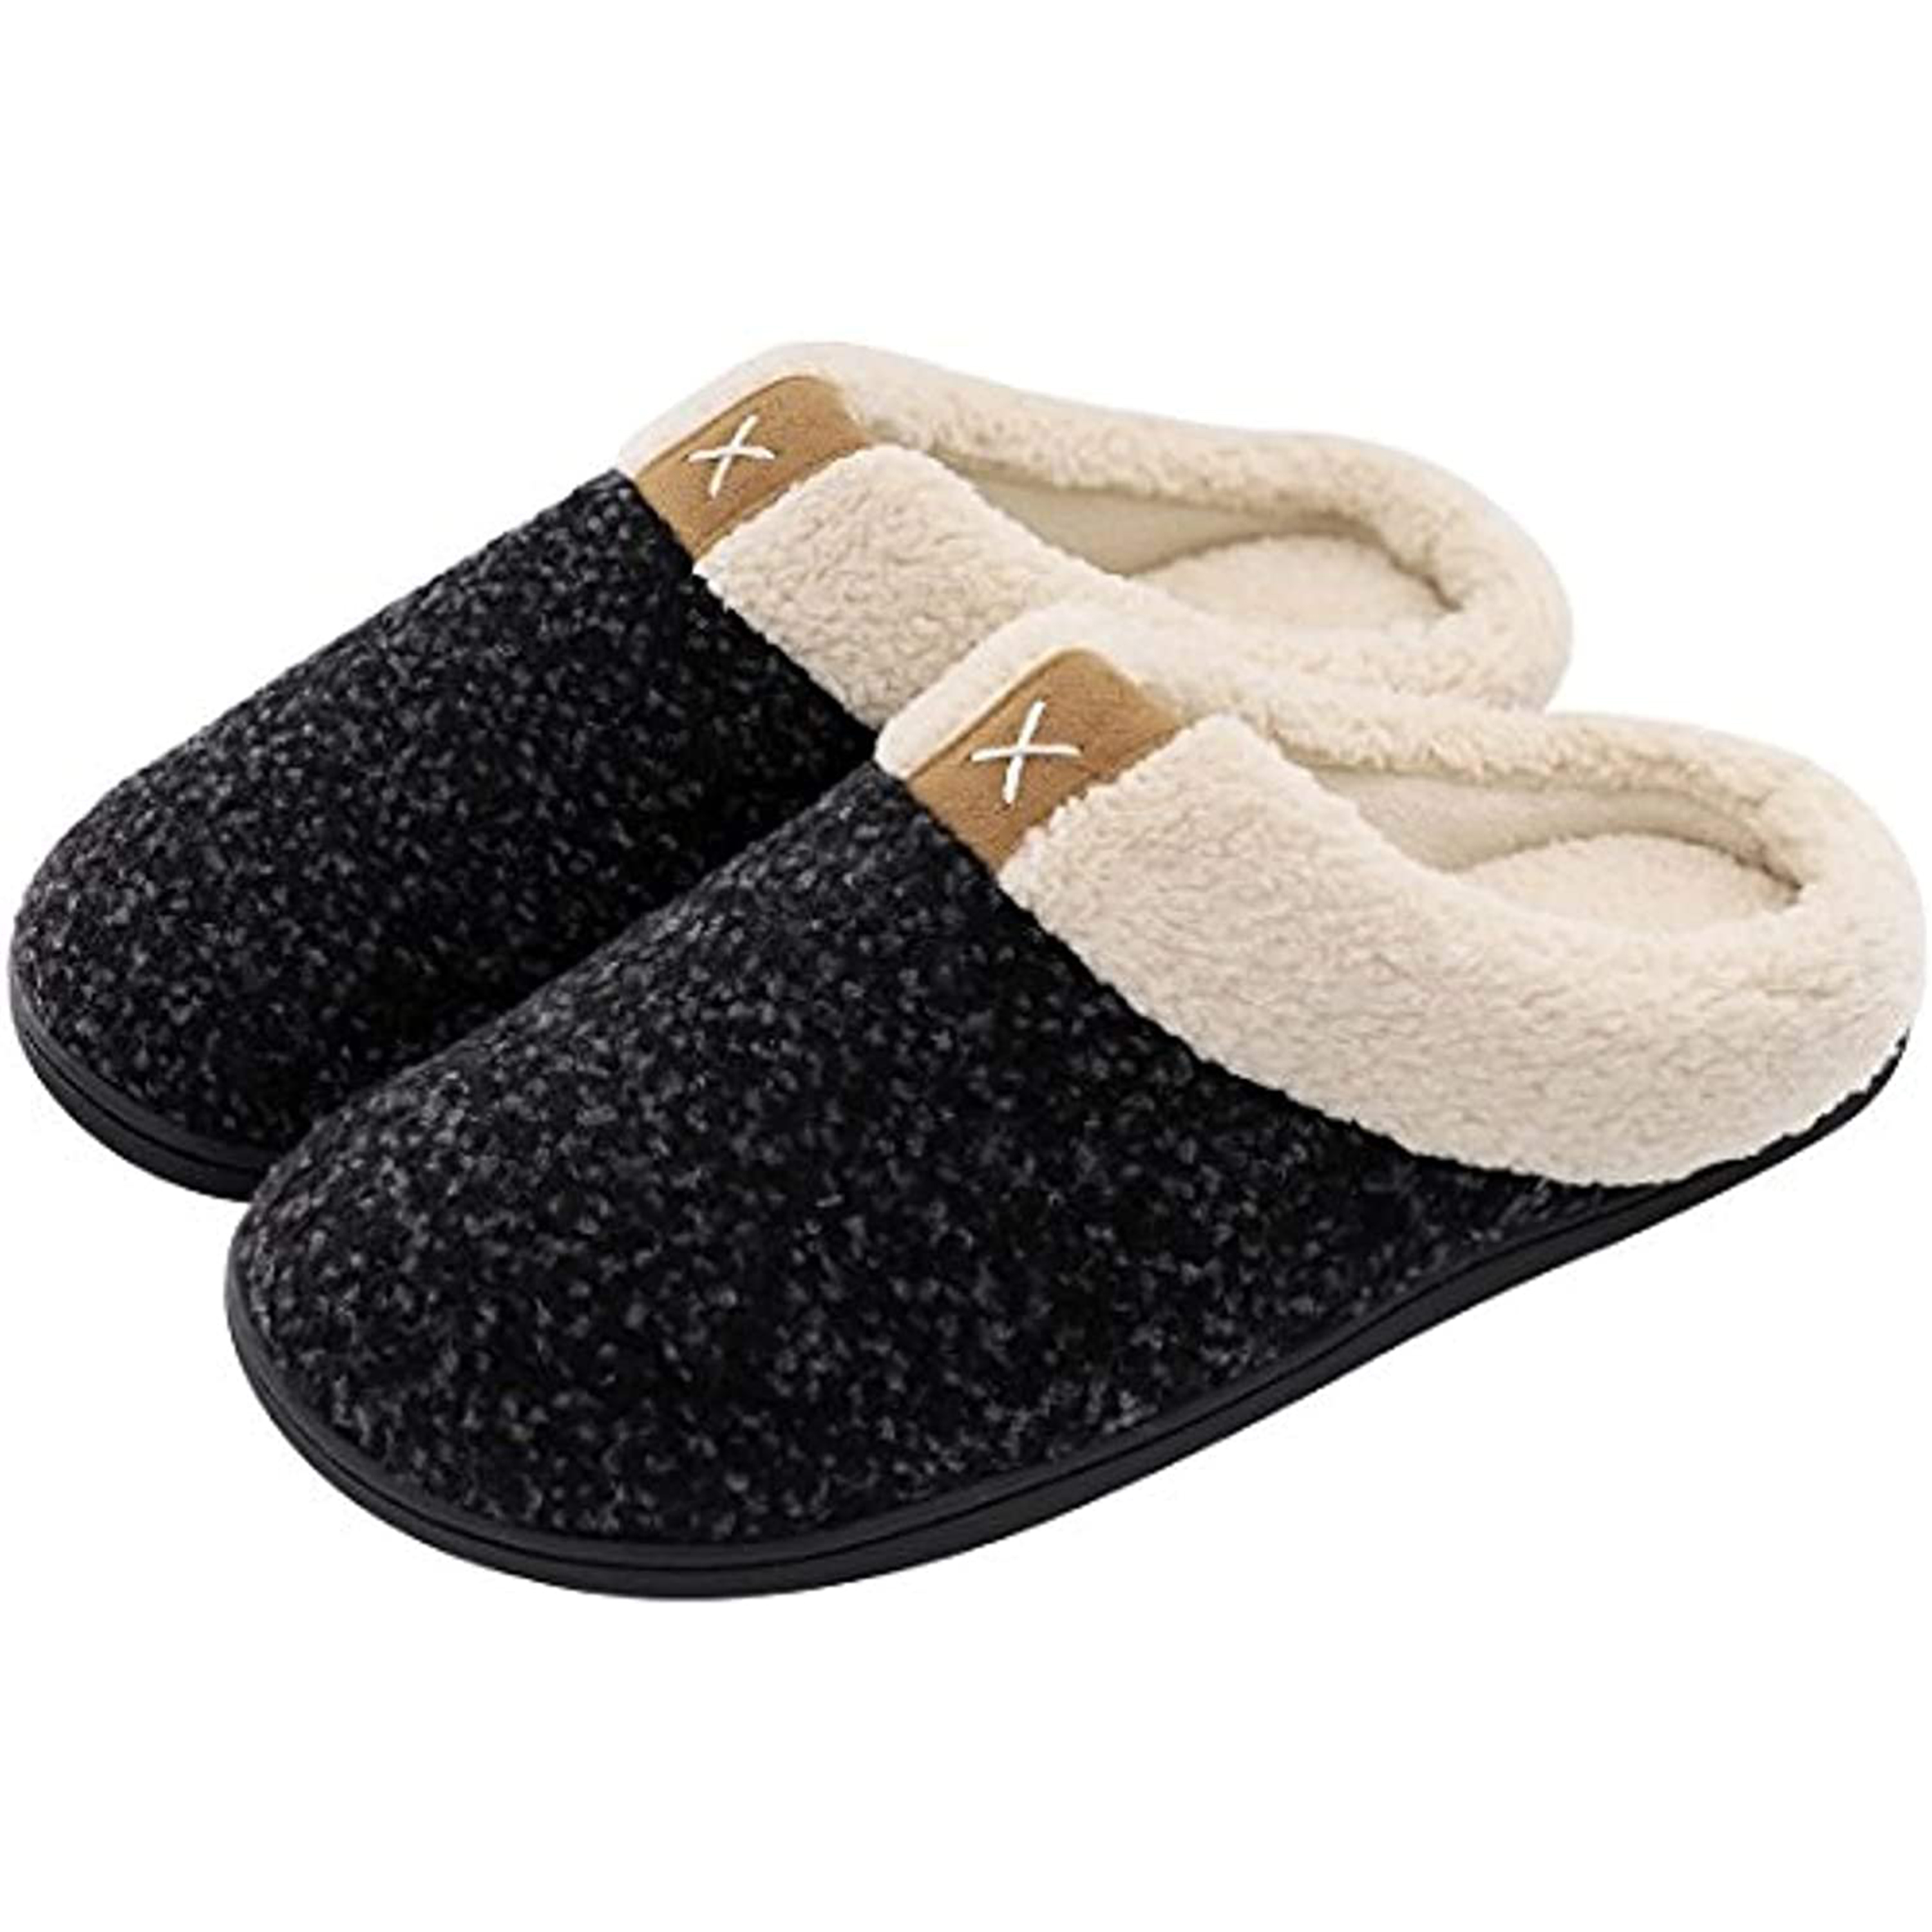 Auranso Mens Memory Foam Slippers Fuzzy Wool-Like Lining Cozy Slippers Mens Inddoor Outdoor Anti Slip Fluffy House Shoes